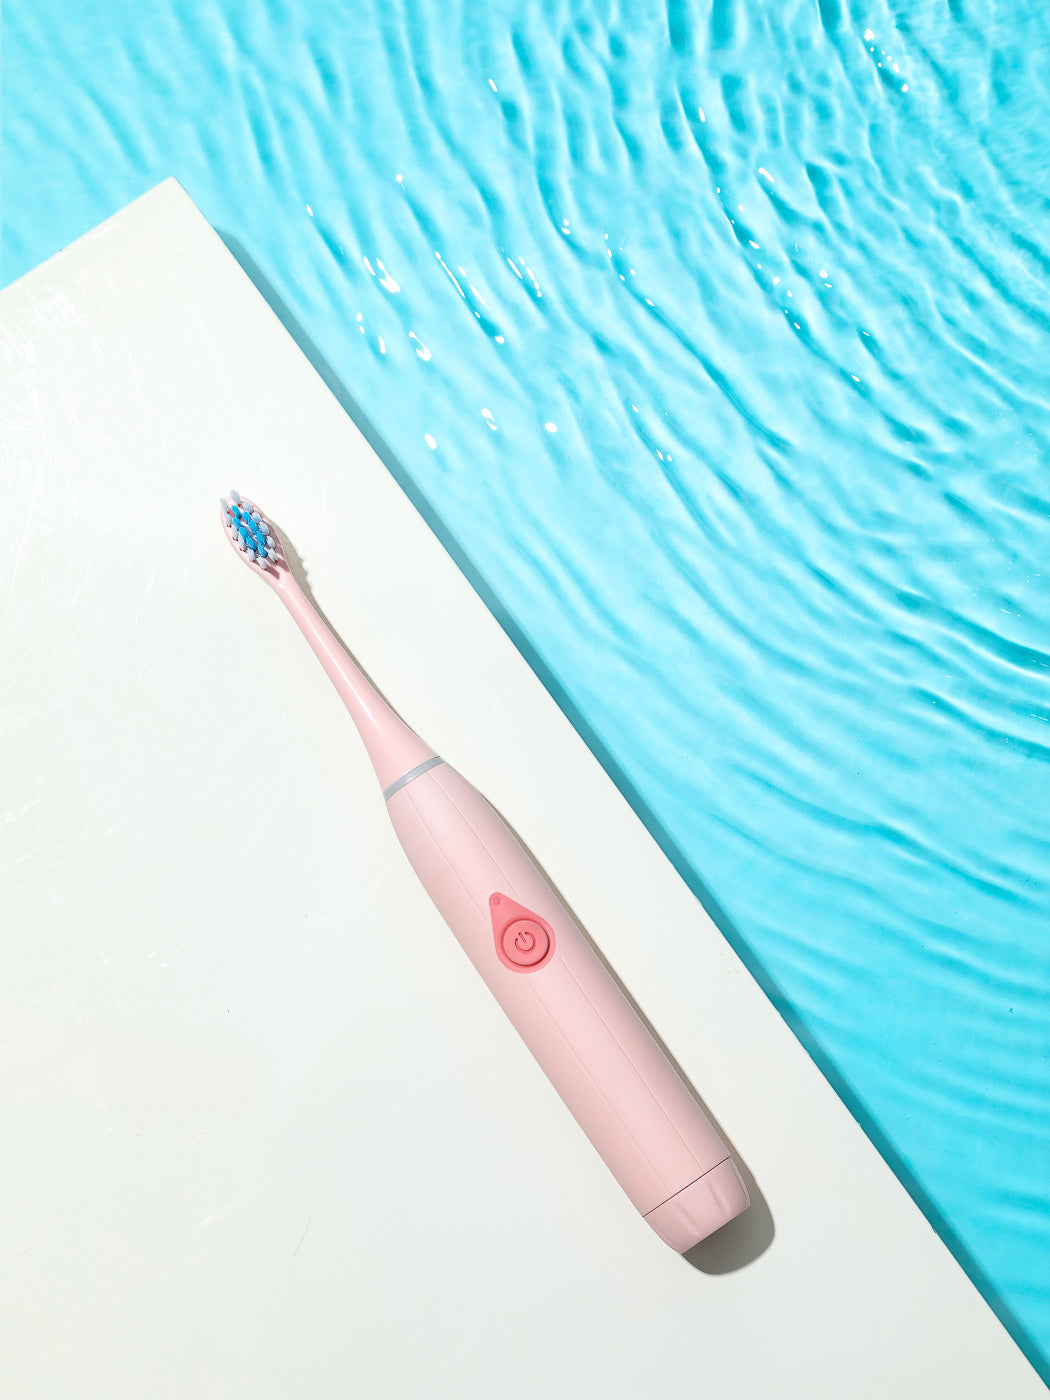 MINISO MULTI-COLOR ELECTRIC TOOTHBRUSH KIT(PINK) 2010566510101 ELECTRIC BRUSH